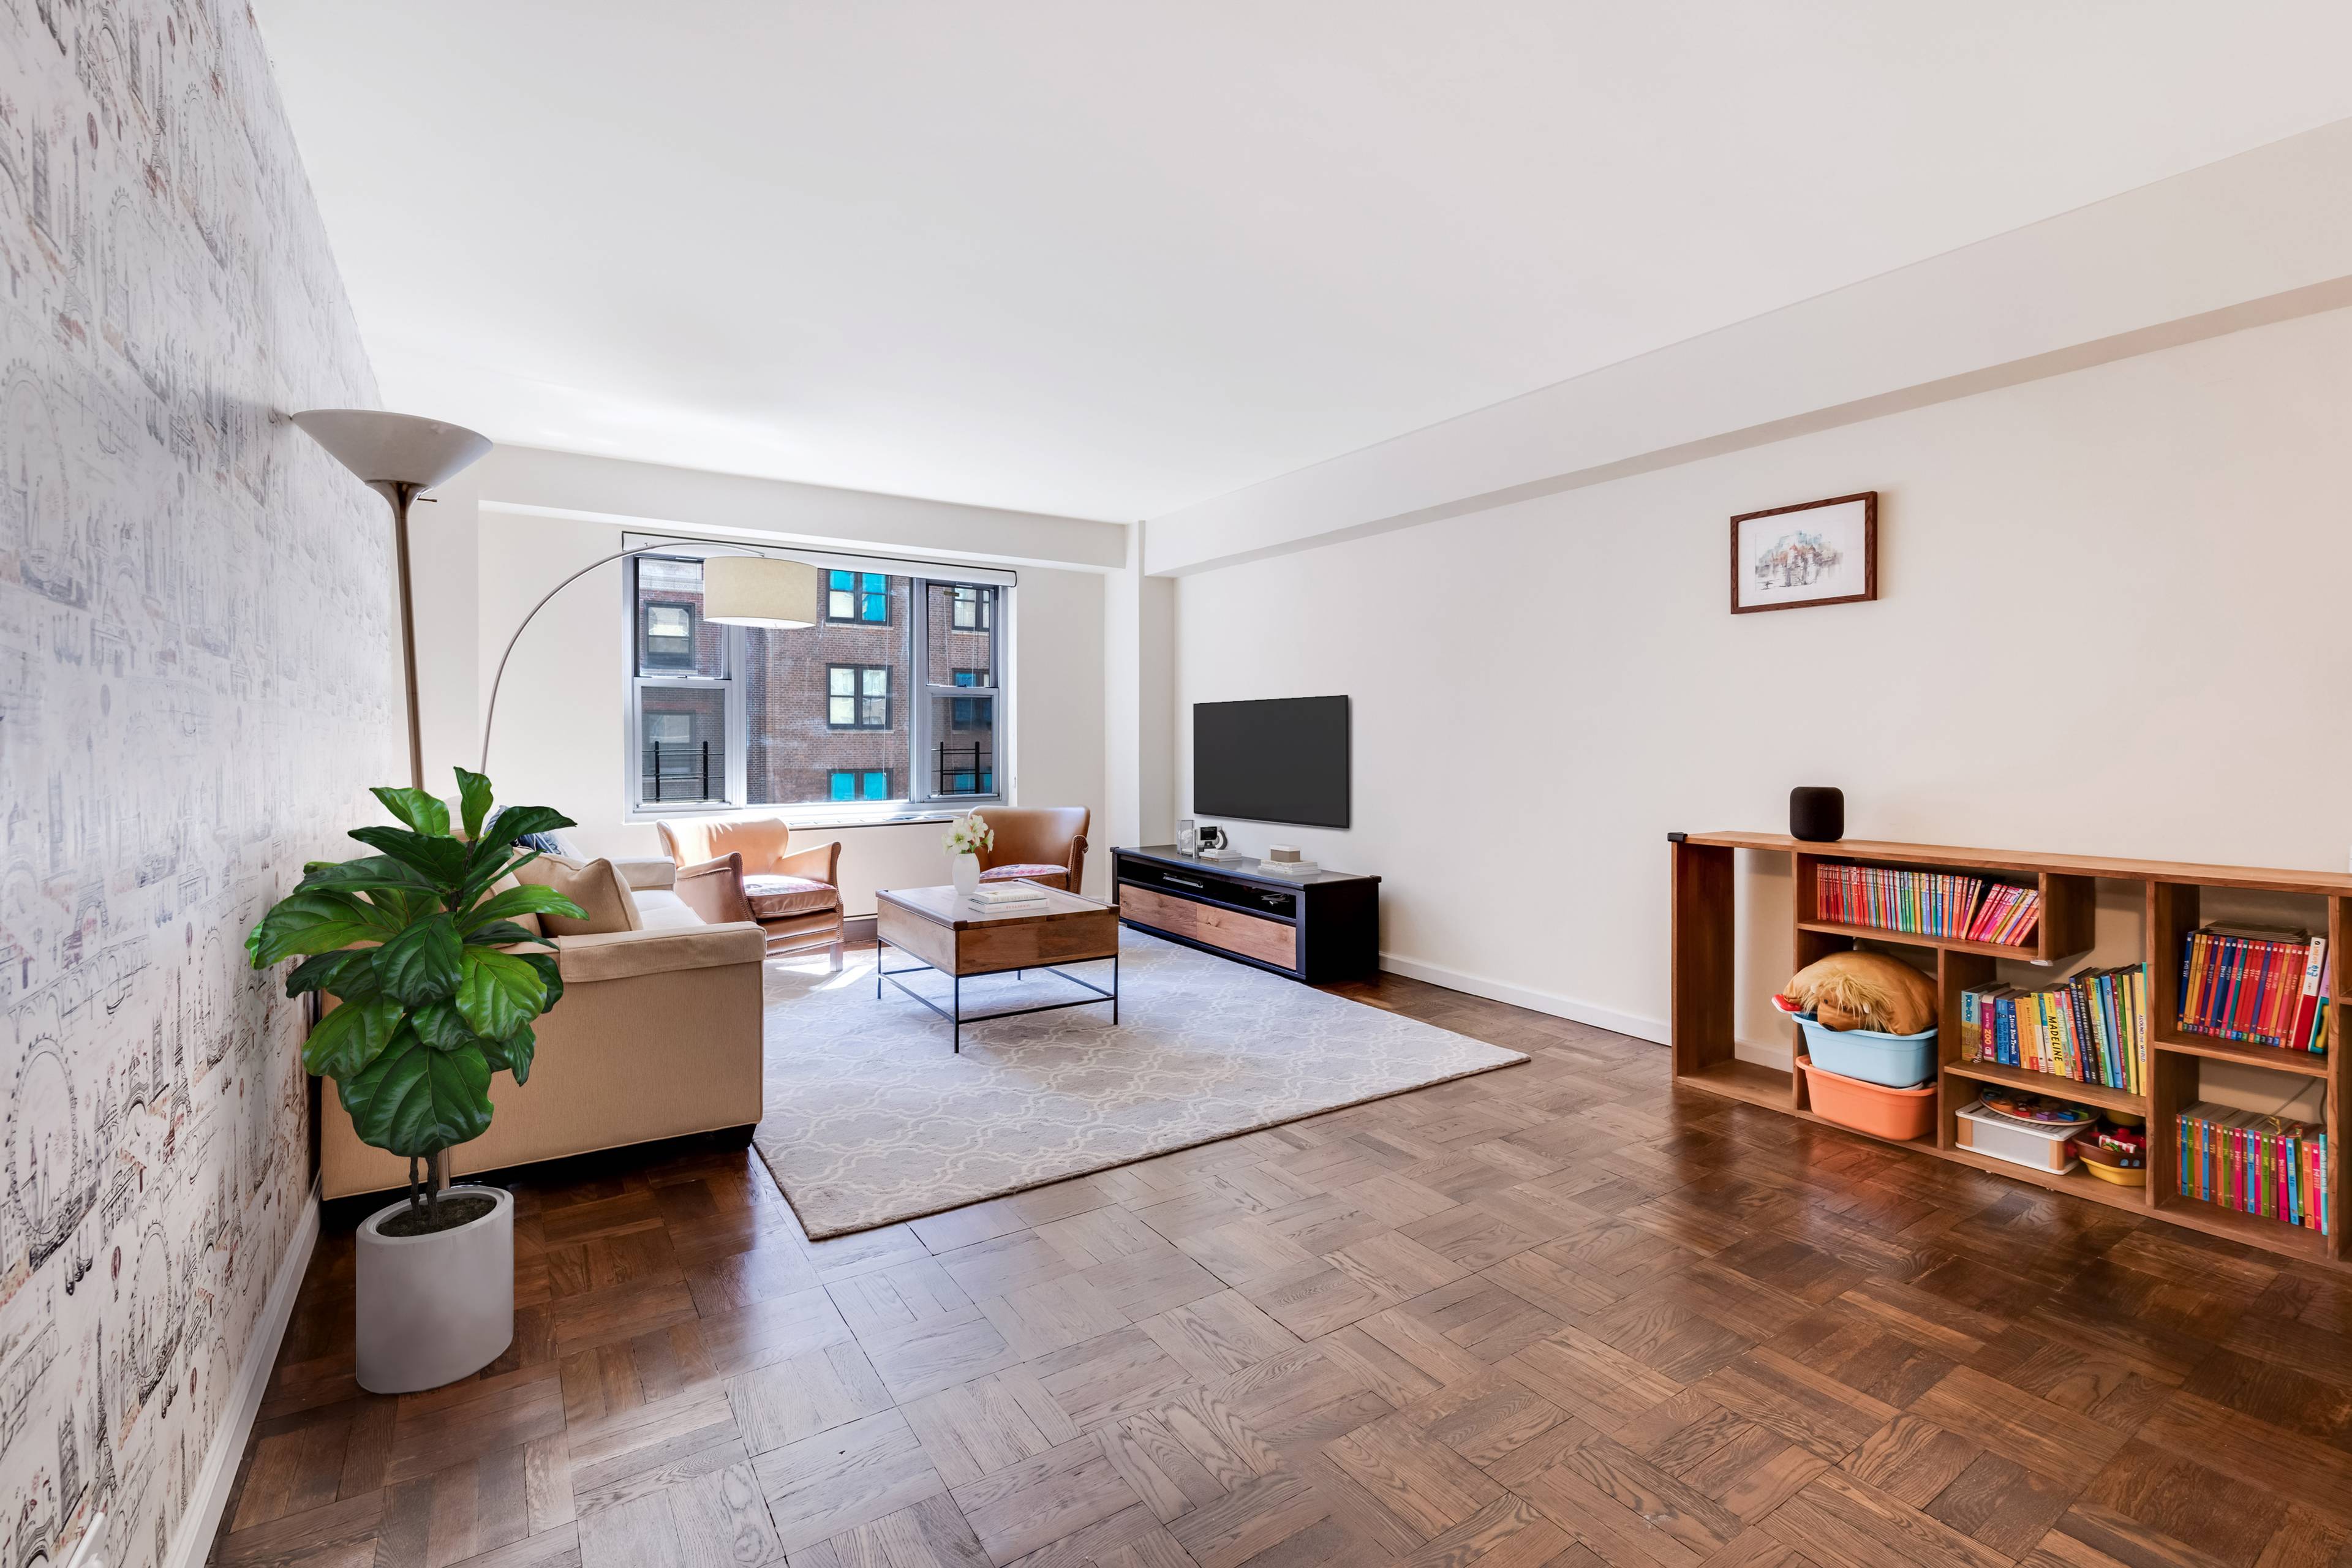 UNIQUE COMBINATION OPPORTUNITY Adjoining apartments on the market at the same time creates a rare amp ; amazing opportunity to build your Manhattan dream home !